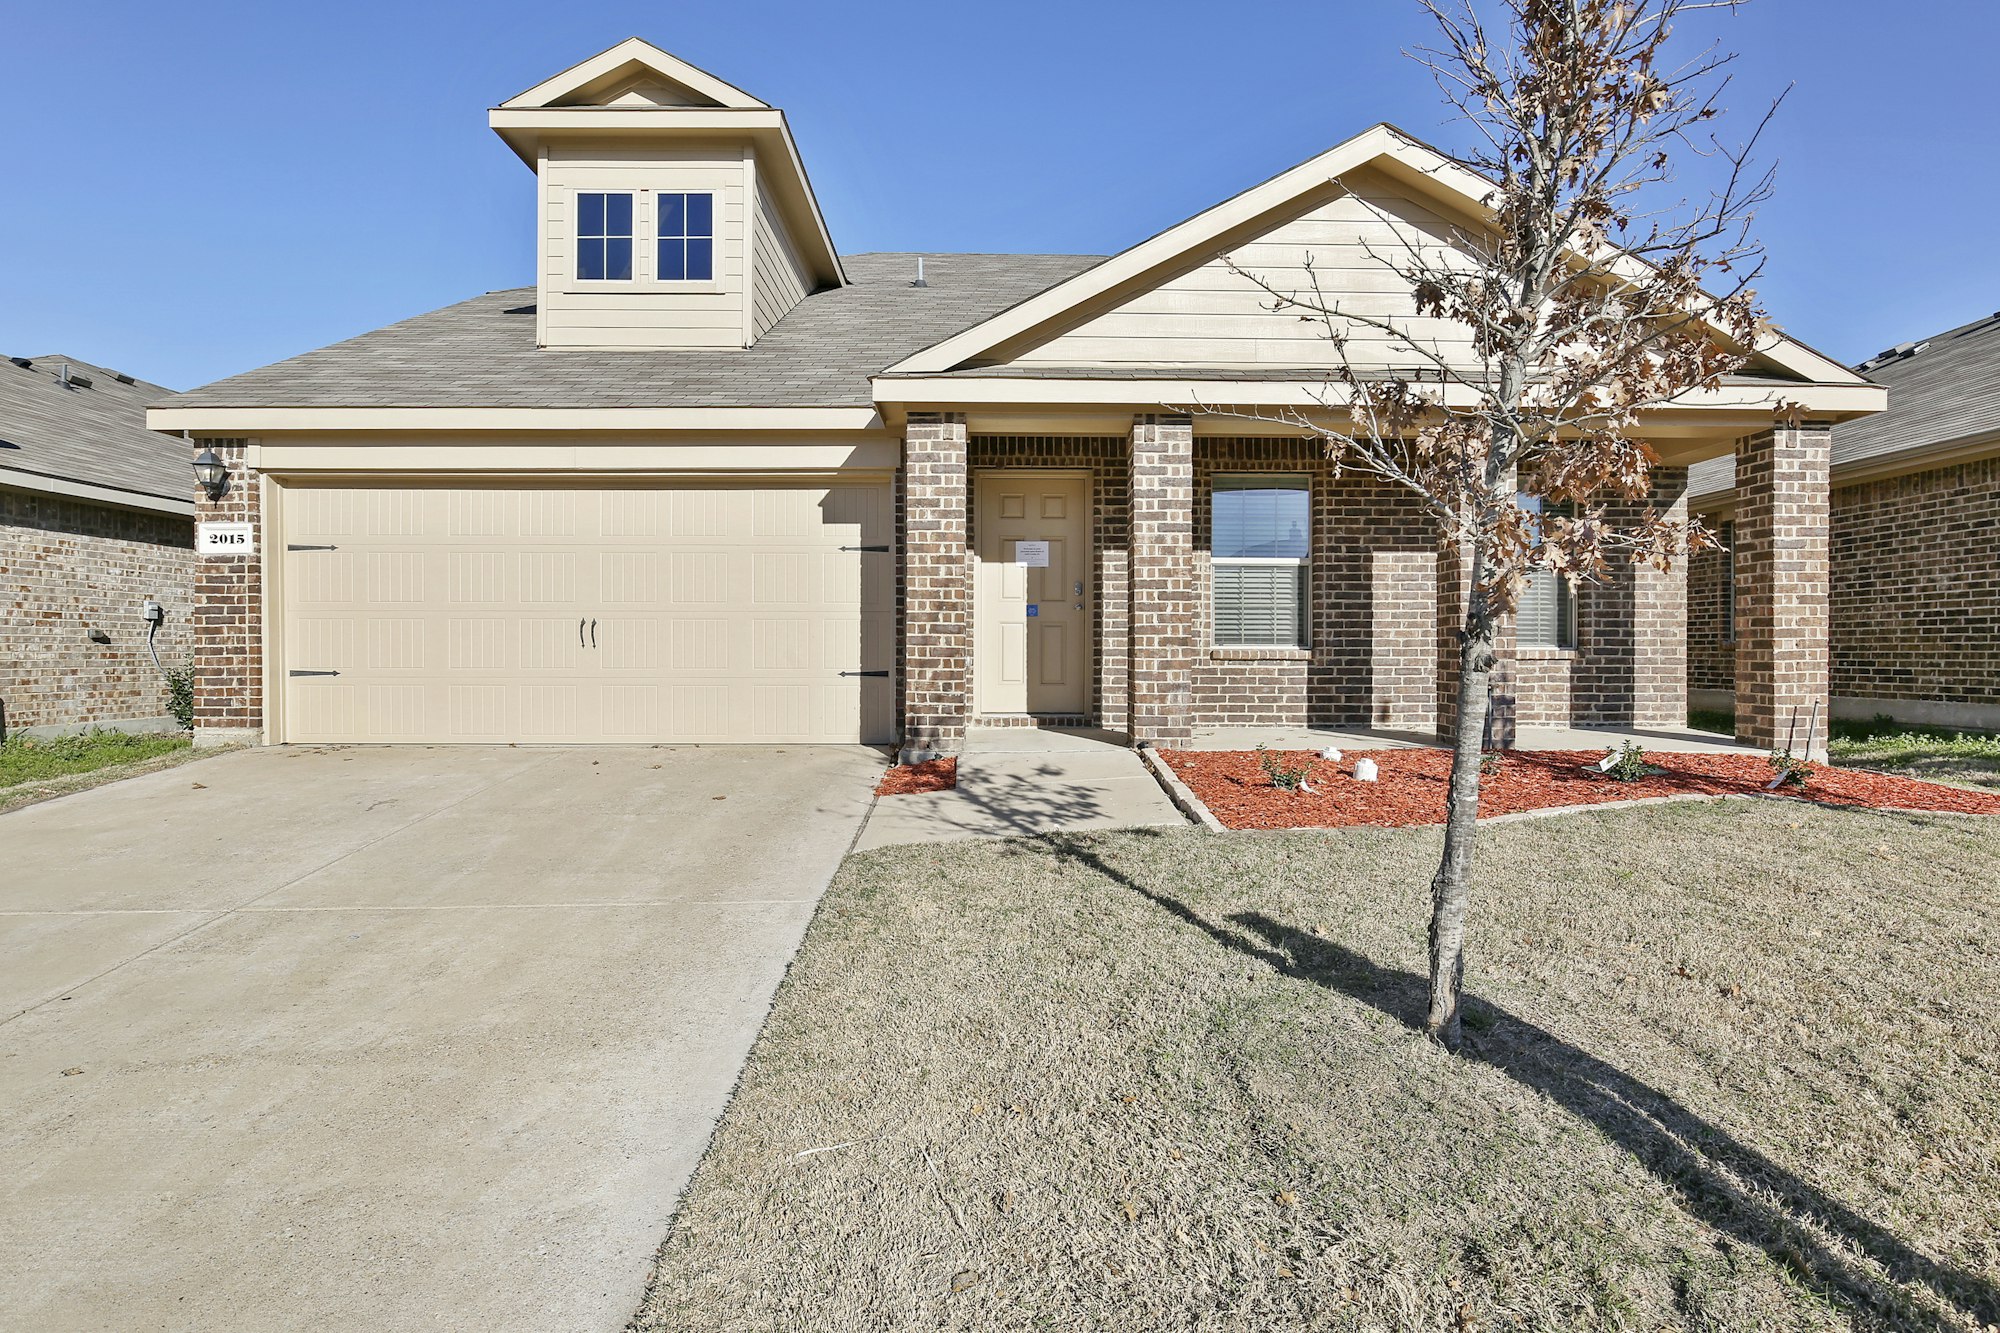 Photo 1 of 26 - 2015 Crosby Dr, Forney, TX 75126